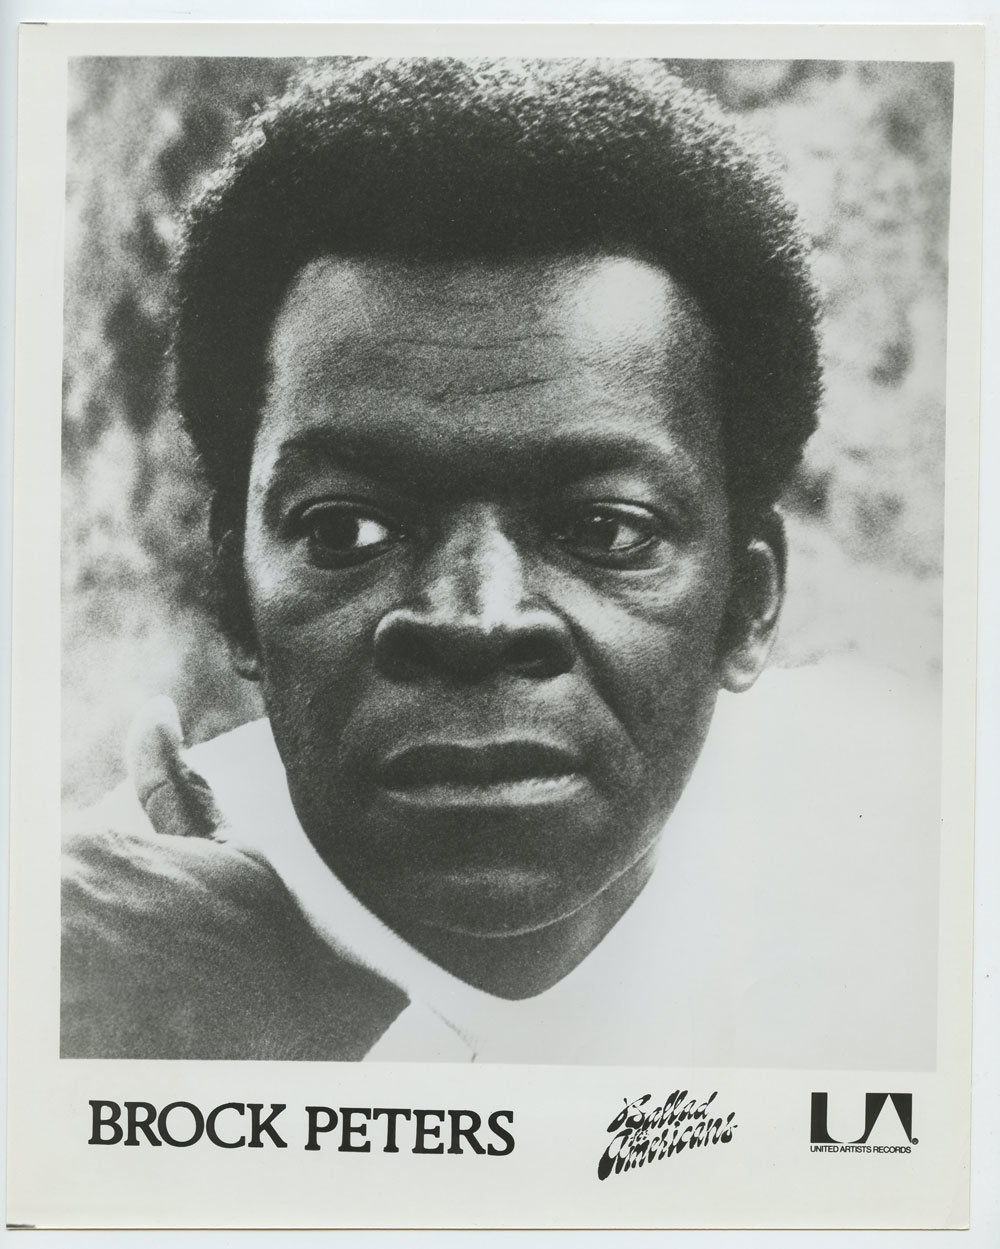 Brock Peters Photo 1970s United Artists Records